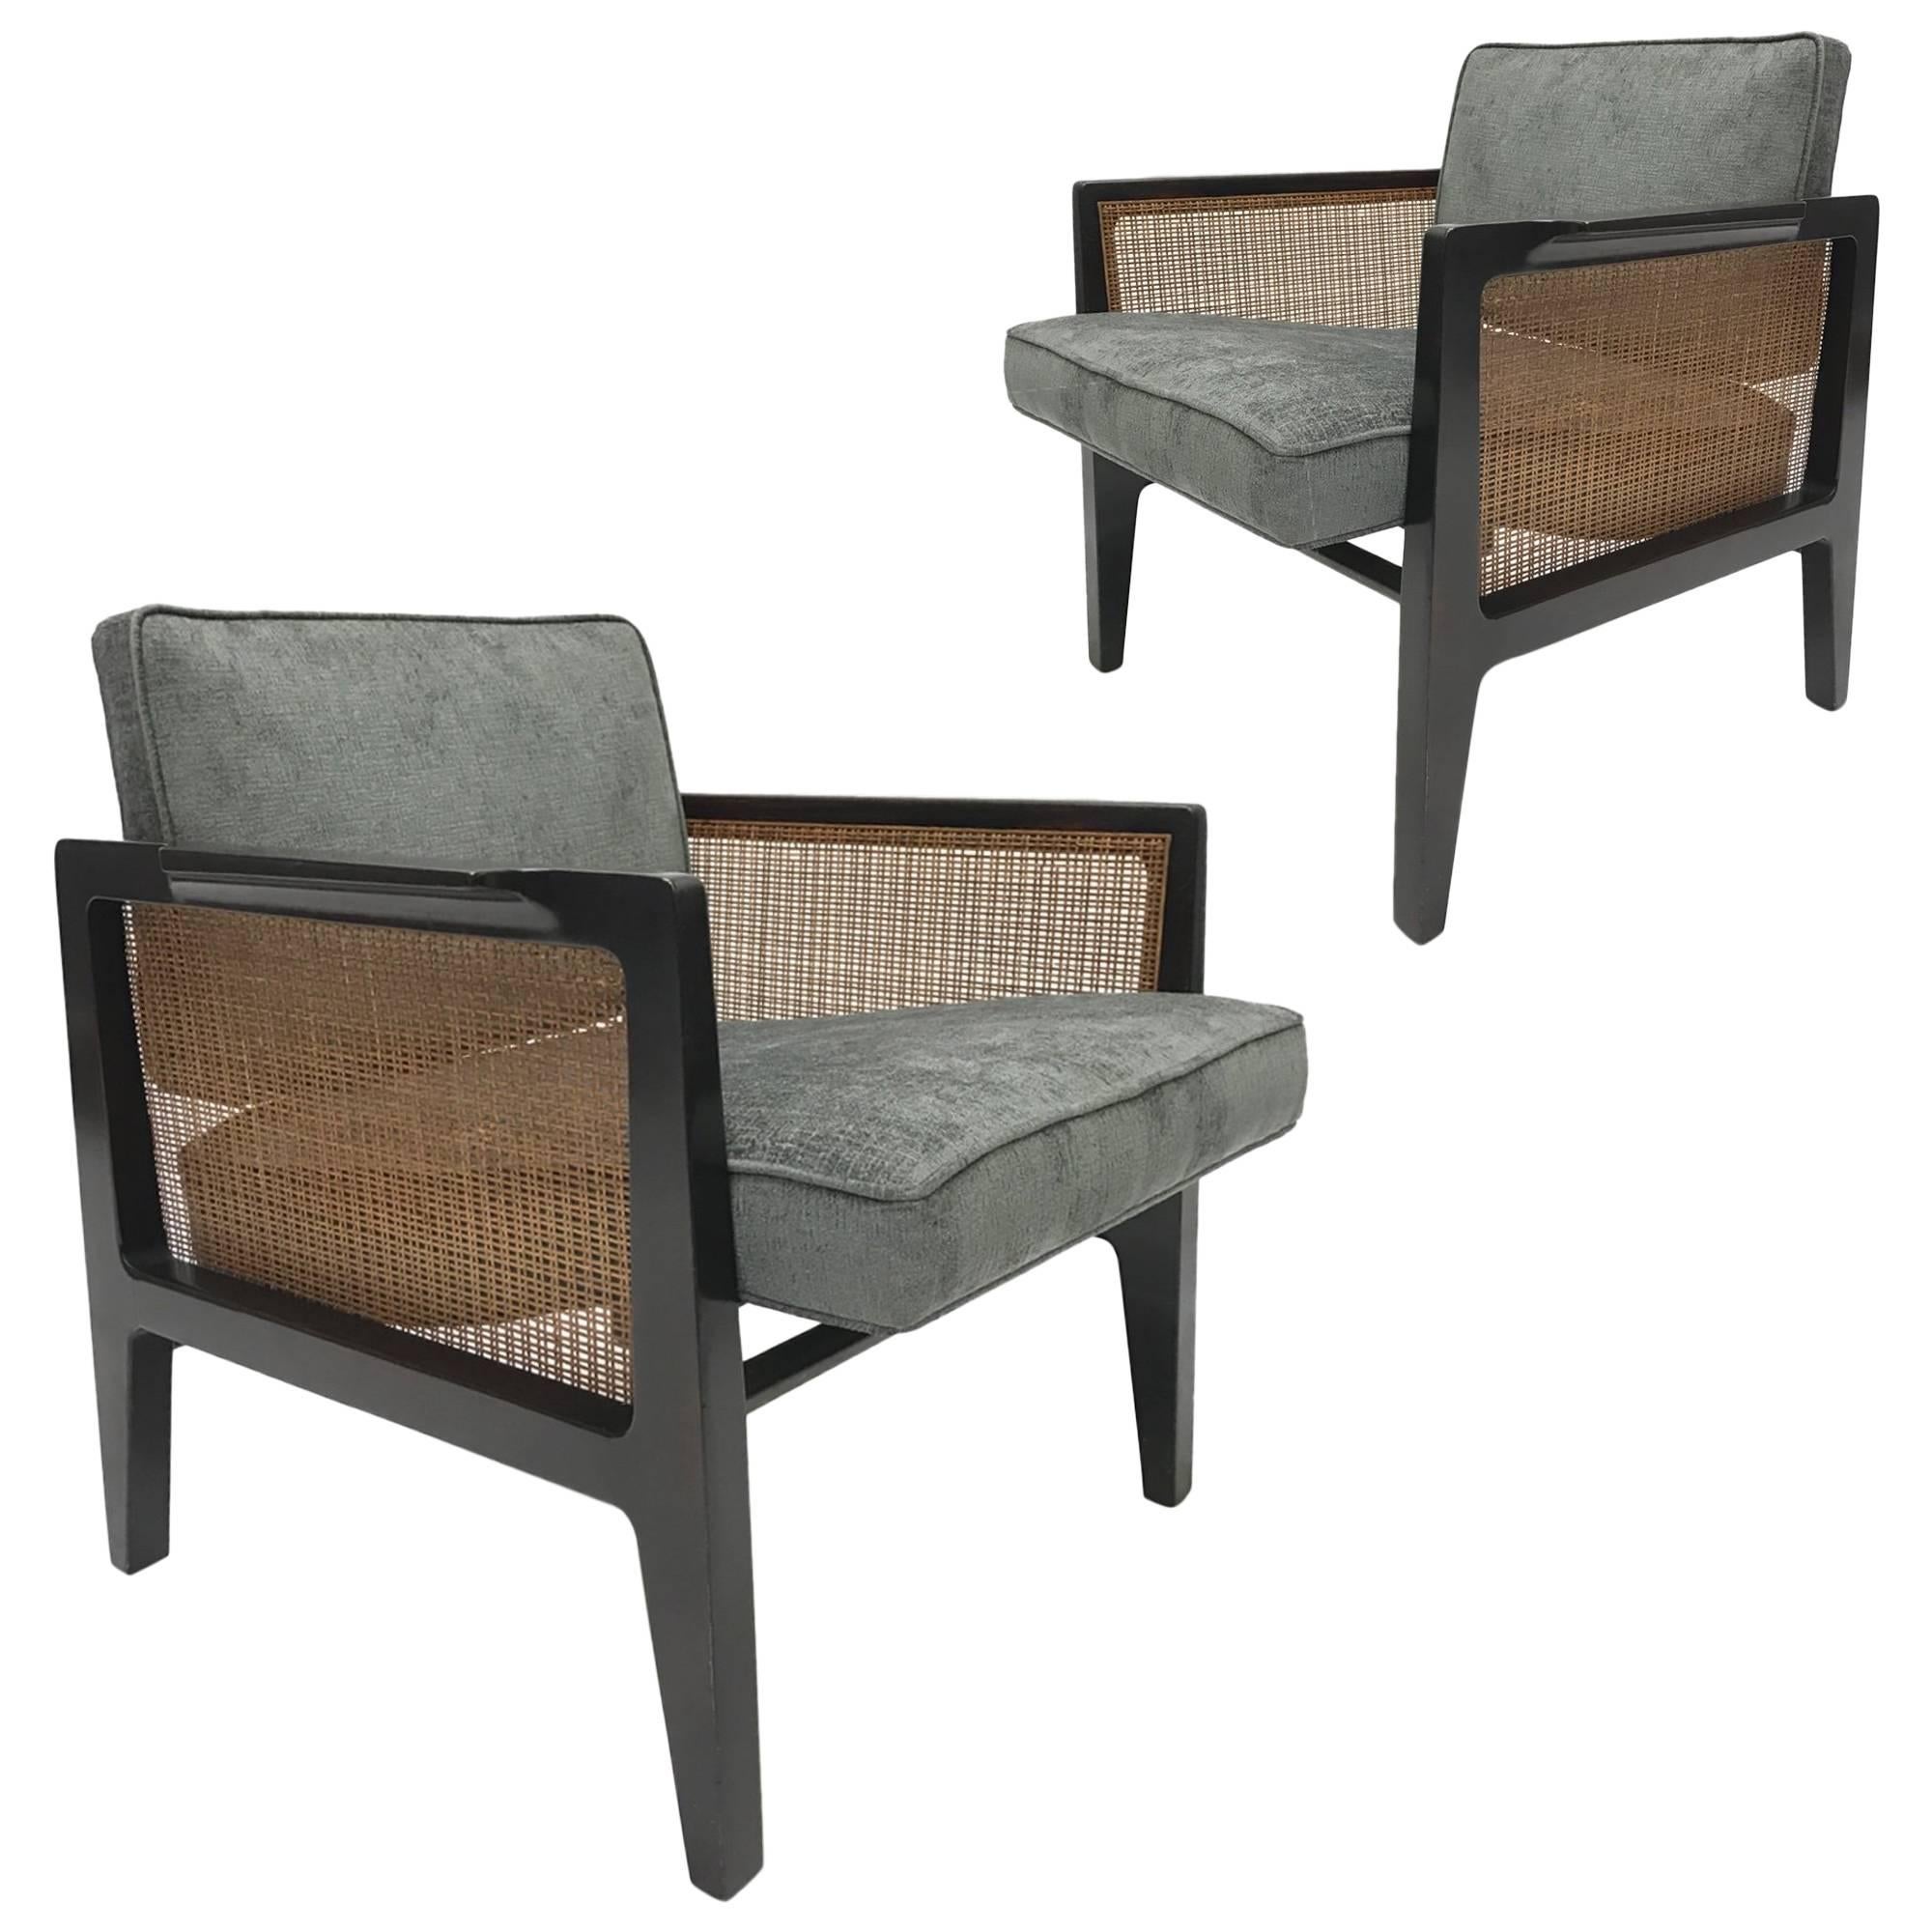 Pair of Edward Wormley for Dunbar Cane Sided Lounge Chairs Model 5513